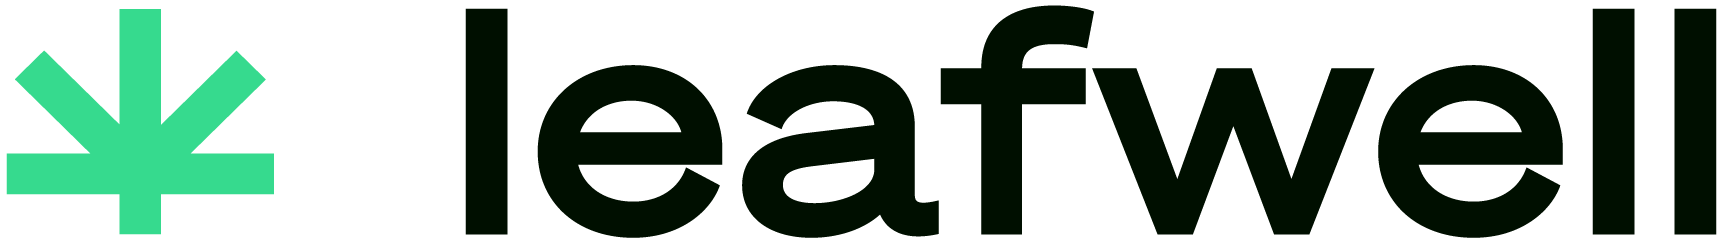 Leafwell_logo_green and black_2021